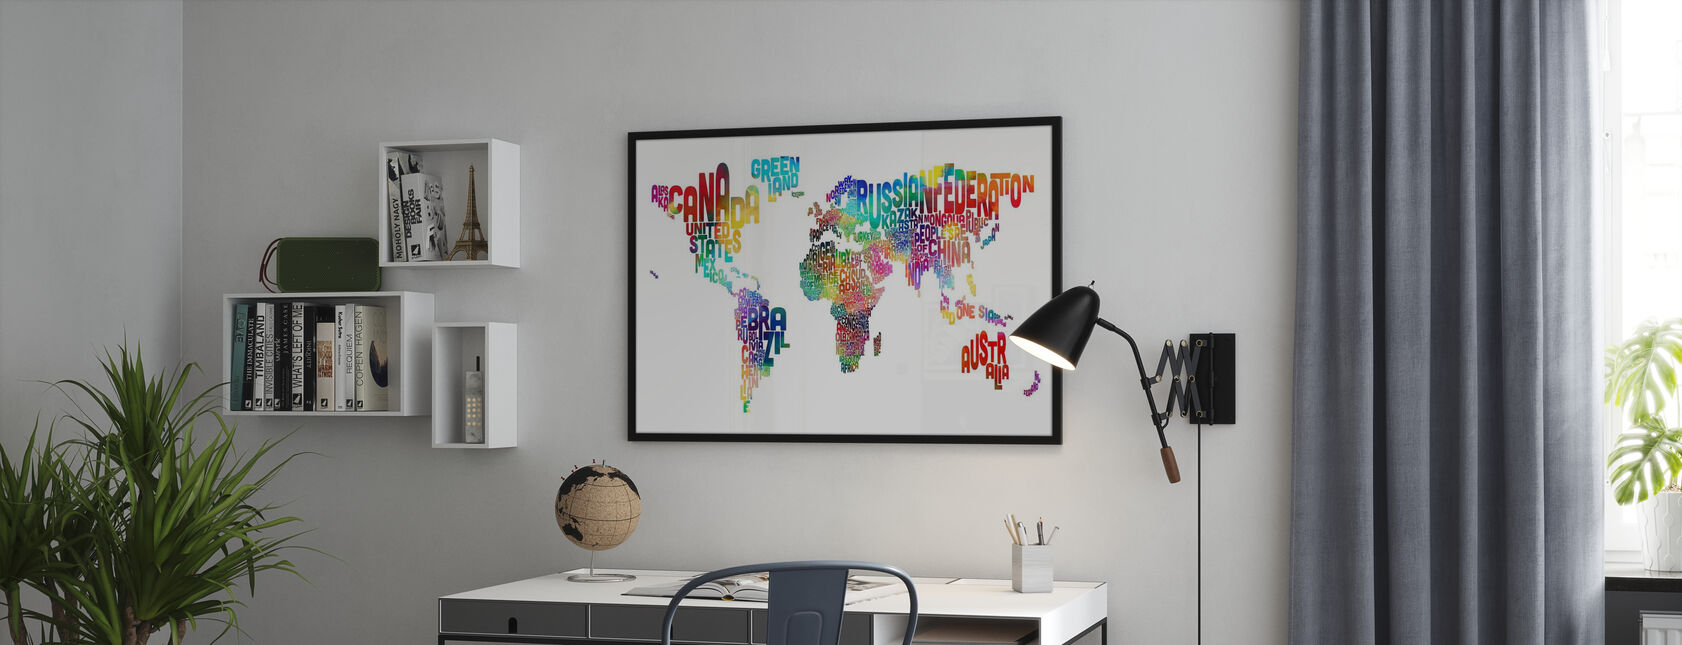 Typographic Text World Map 2 - Poster - Office